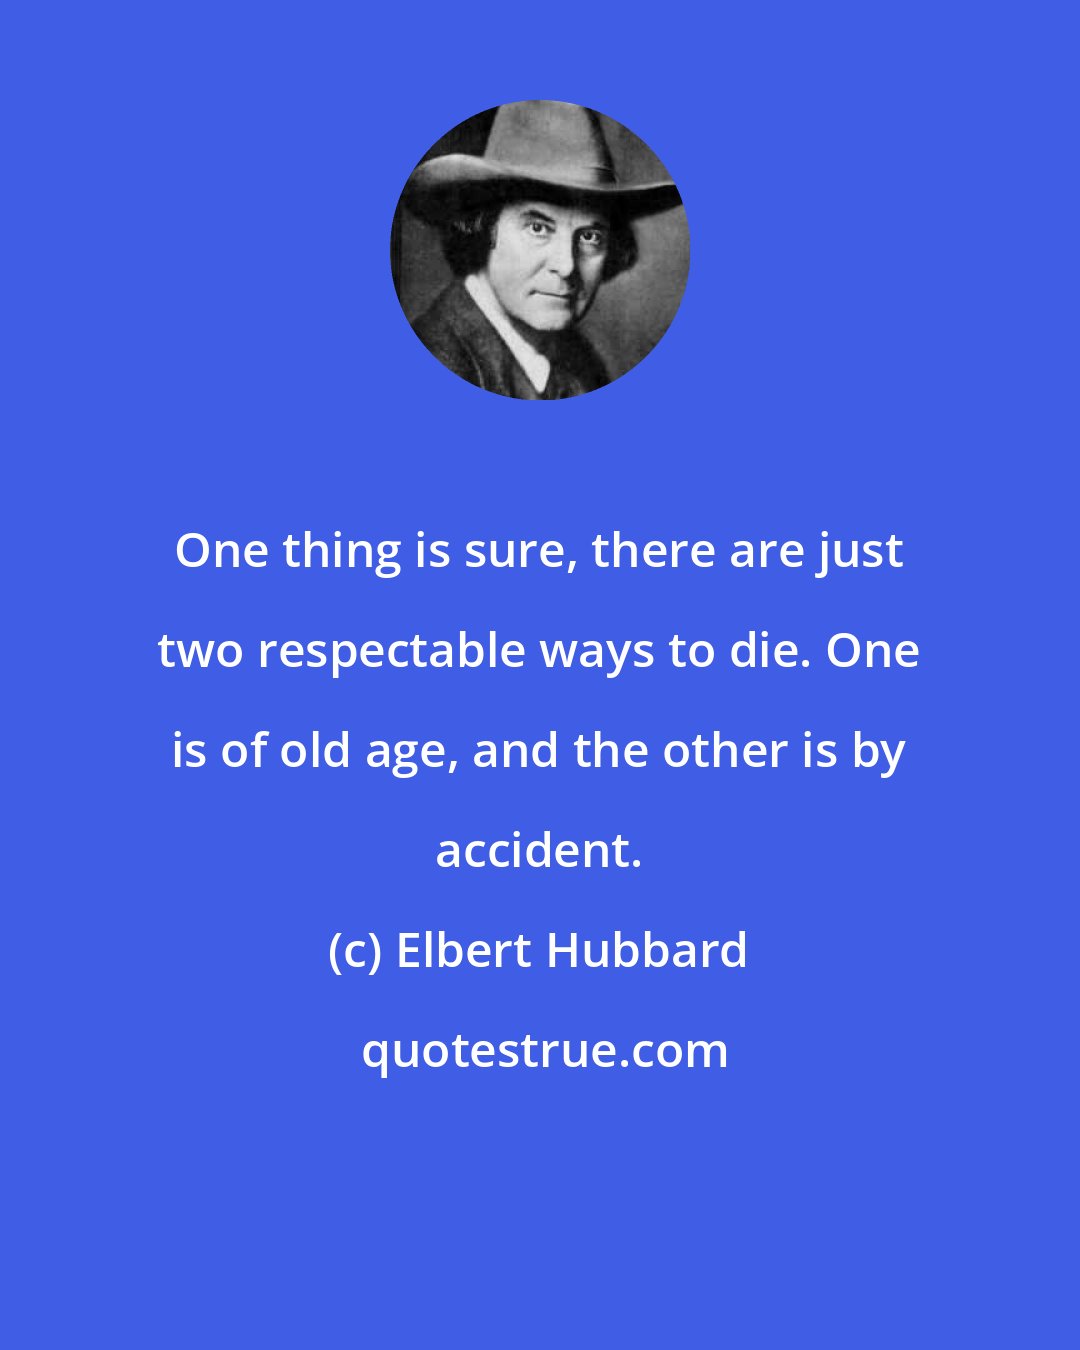 Elbert Hubbard: One thing is sure, there are just two respectable ways to die. One is of old age, and the other is by accident.